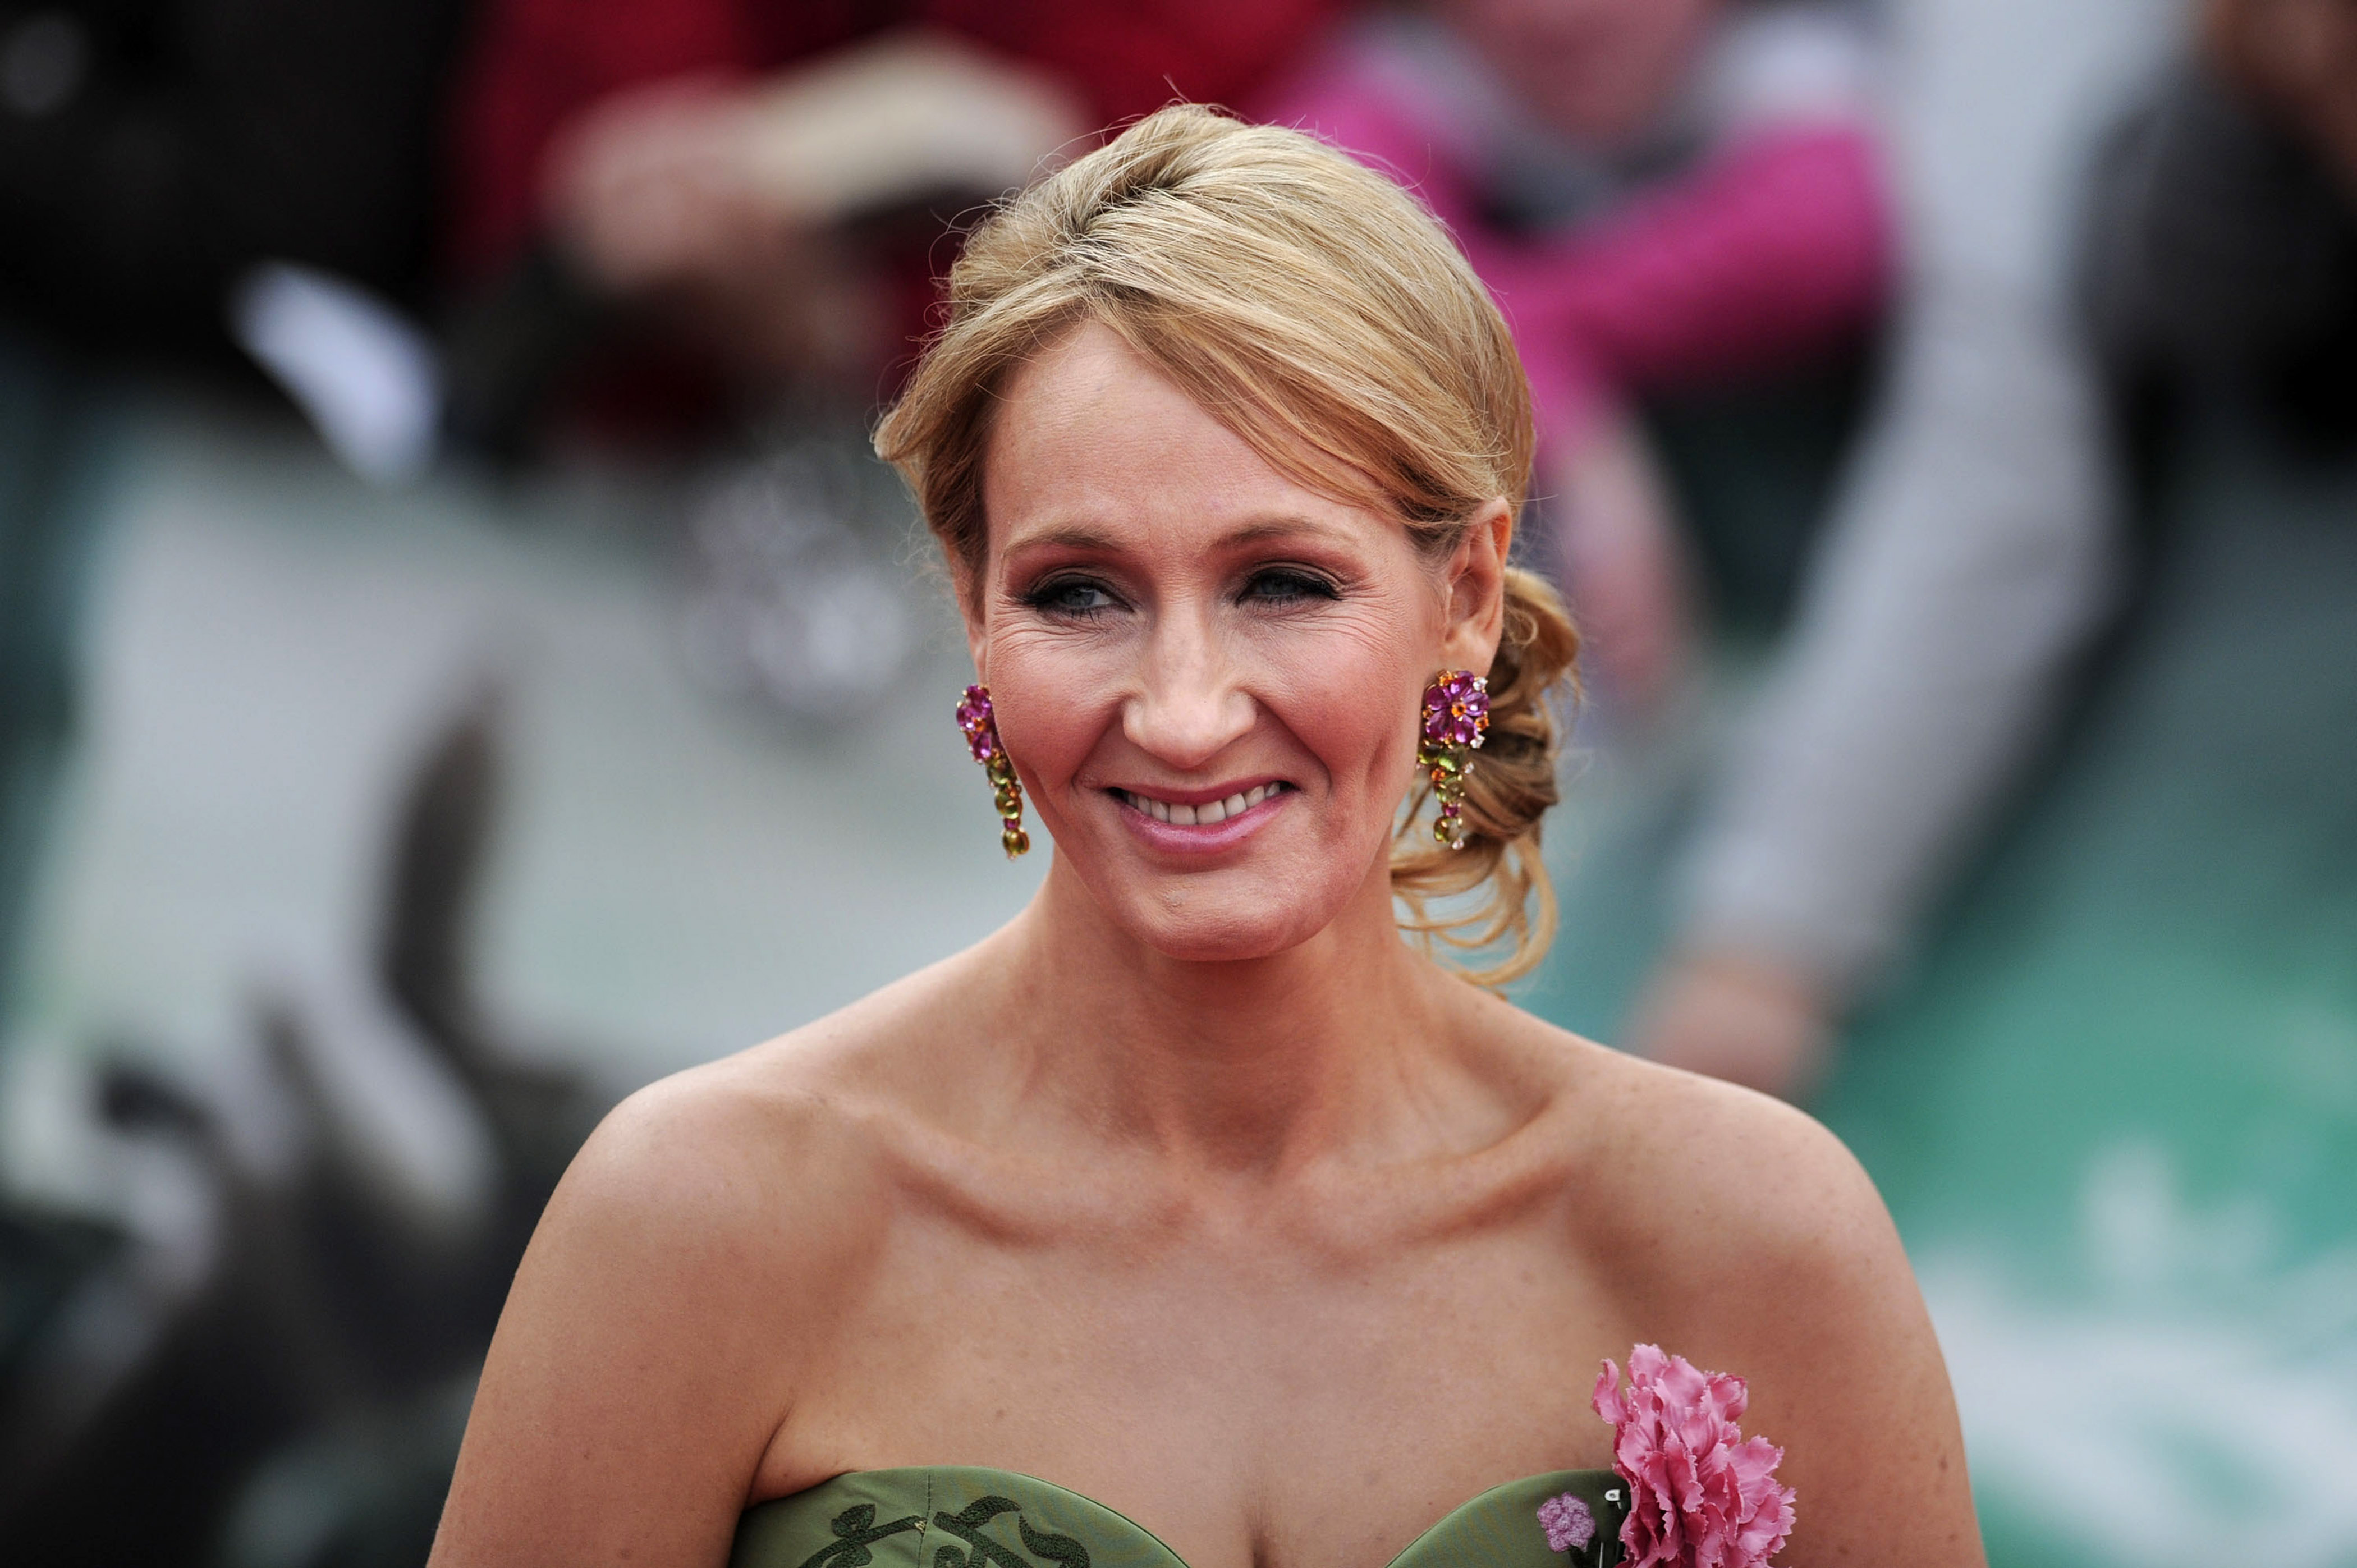 Harry Potter author J.K Rowling attends the world premiere of Harry Potter and the Deathly Hallows - Part 2 in central London on July 7, 2011.  Thousands of Harry Potter fanatics screamed for the stars of the epic movie series as they hit the London red carpet for the final film's world premiere. AFP PHOTO / CARL COURT / AFP PHOTO / CARL COURT